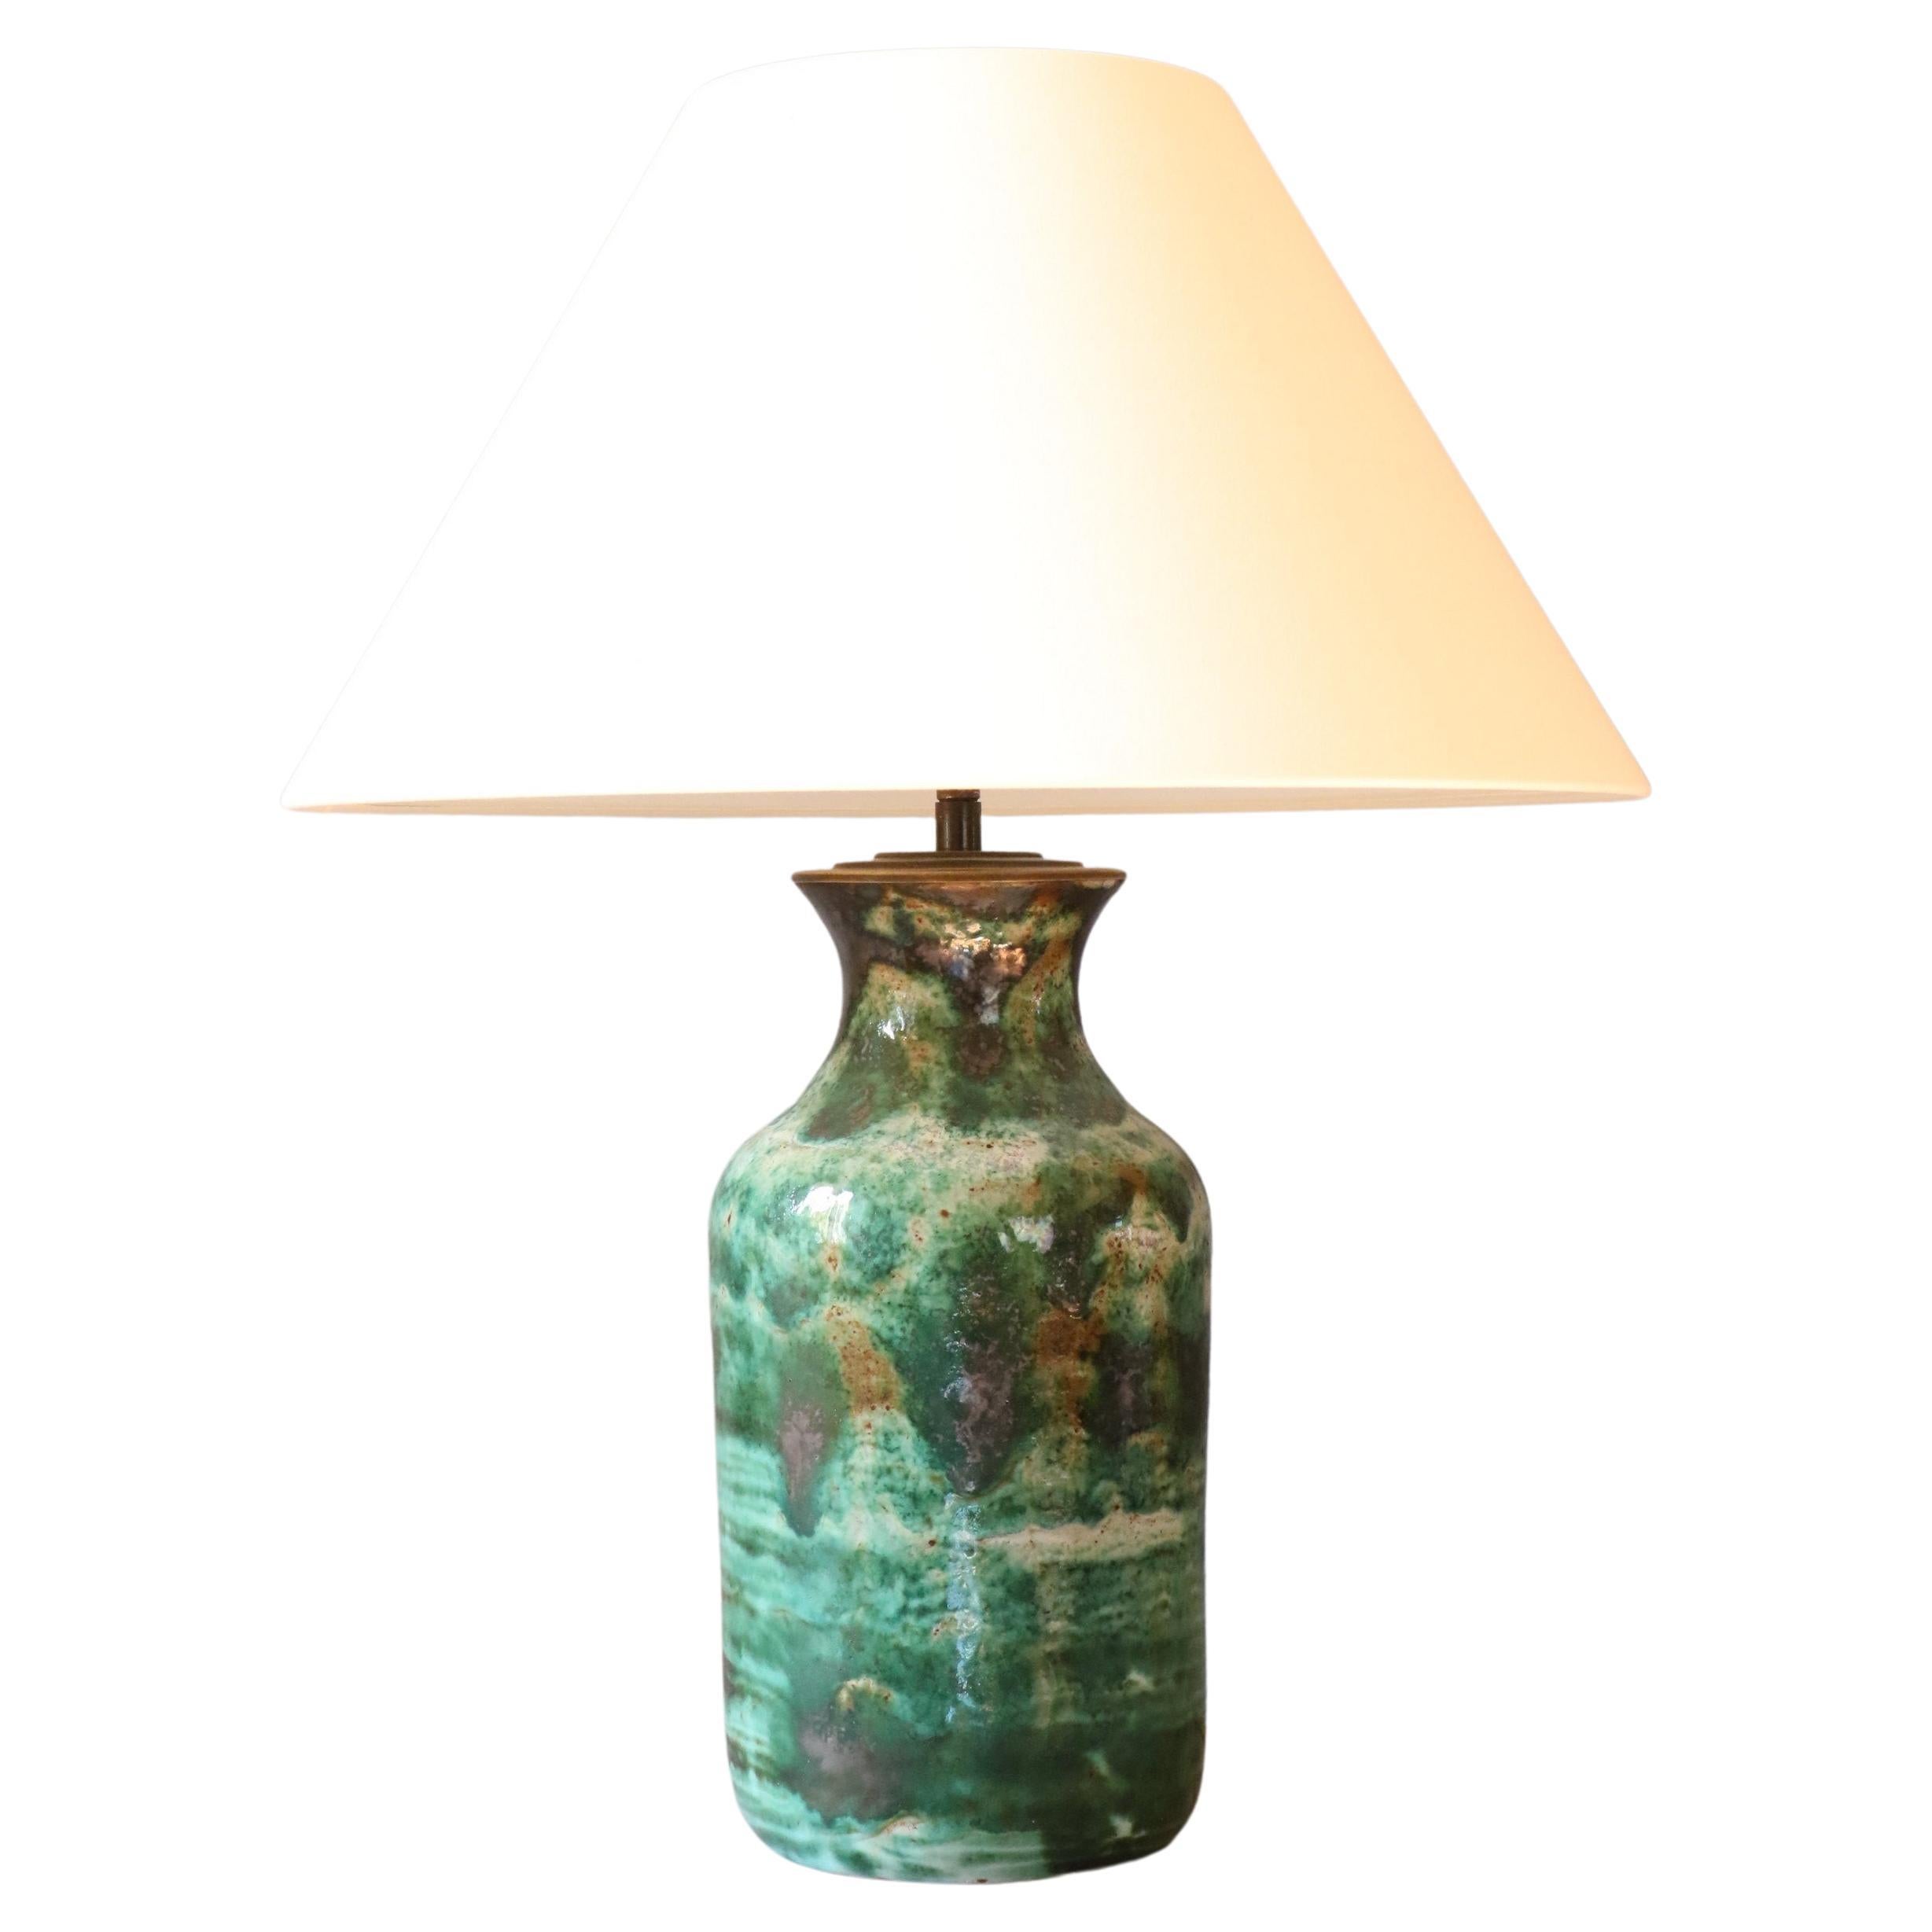 Robert Picault, High Ceramic Lamp, Signed, Vallauris, France, 1950s For Sale